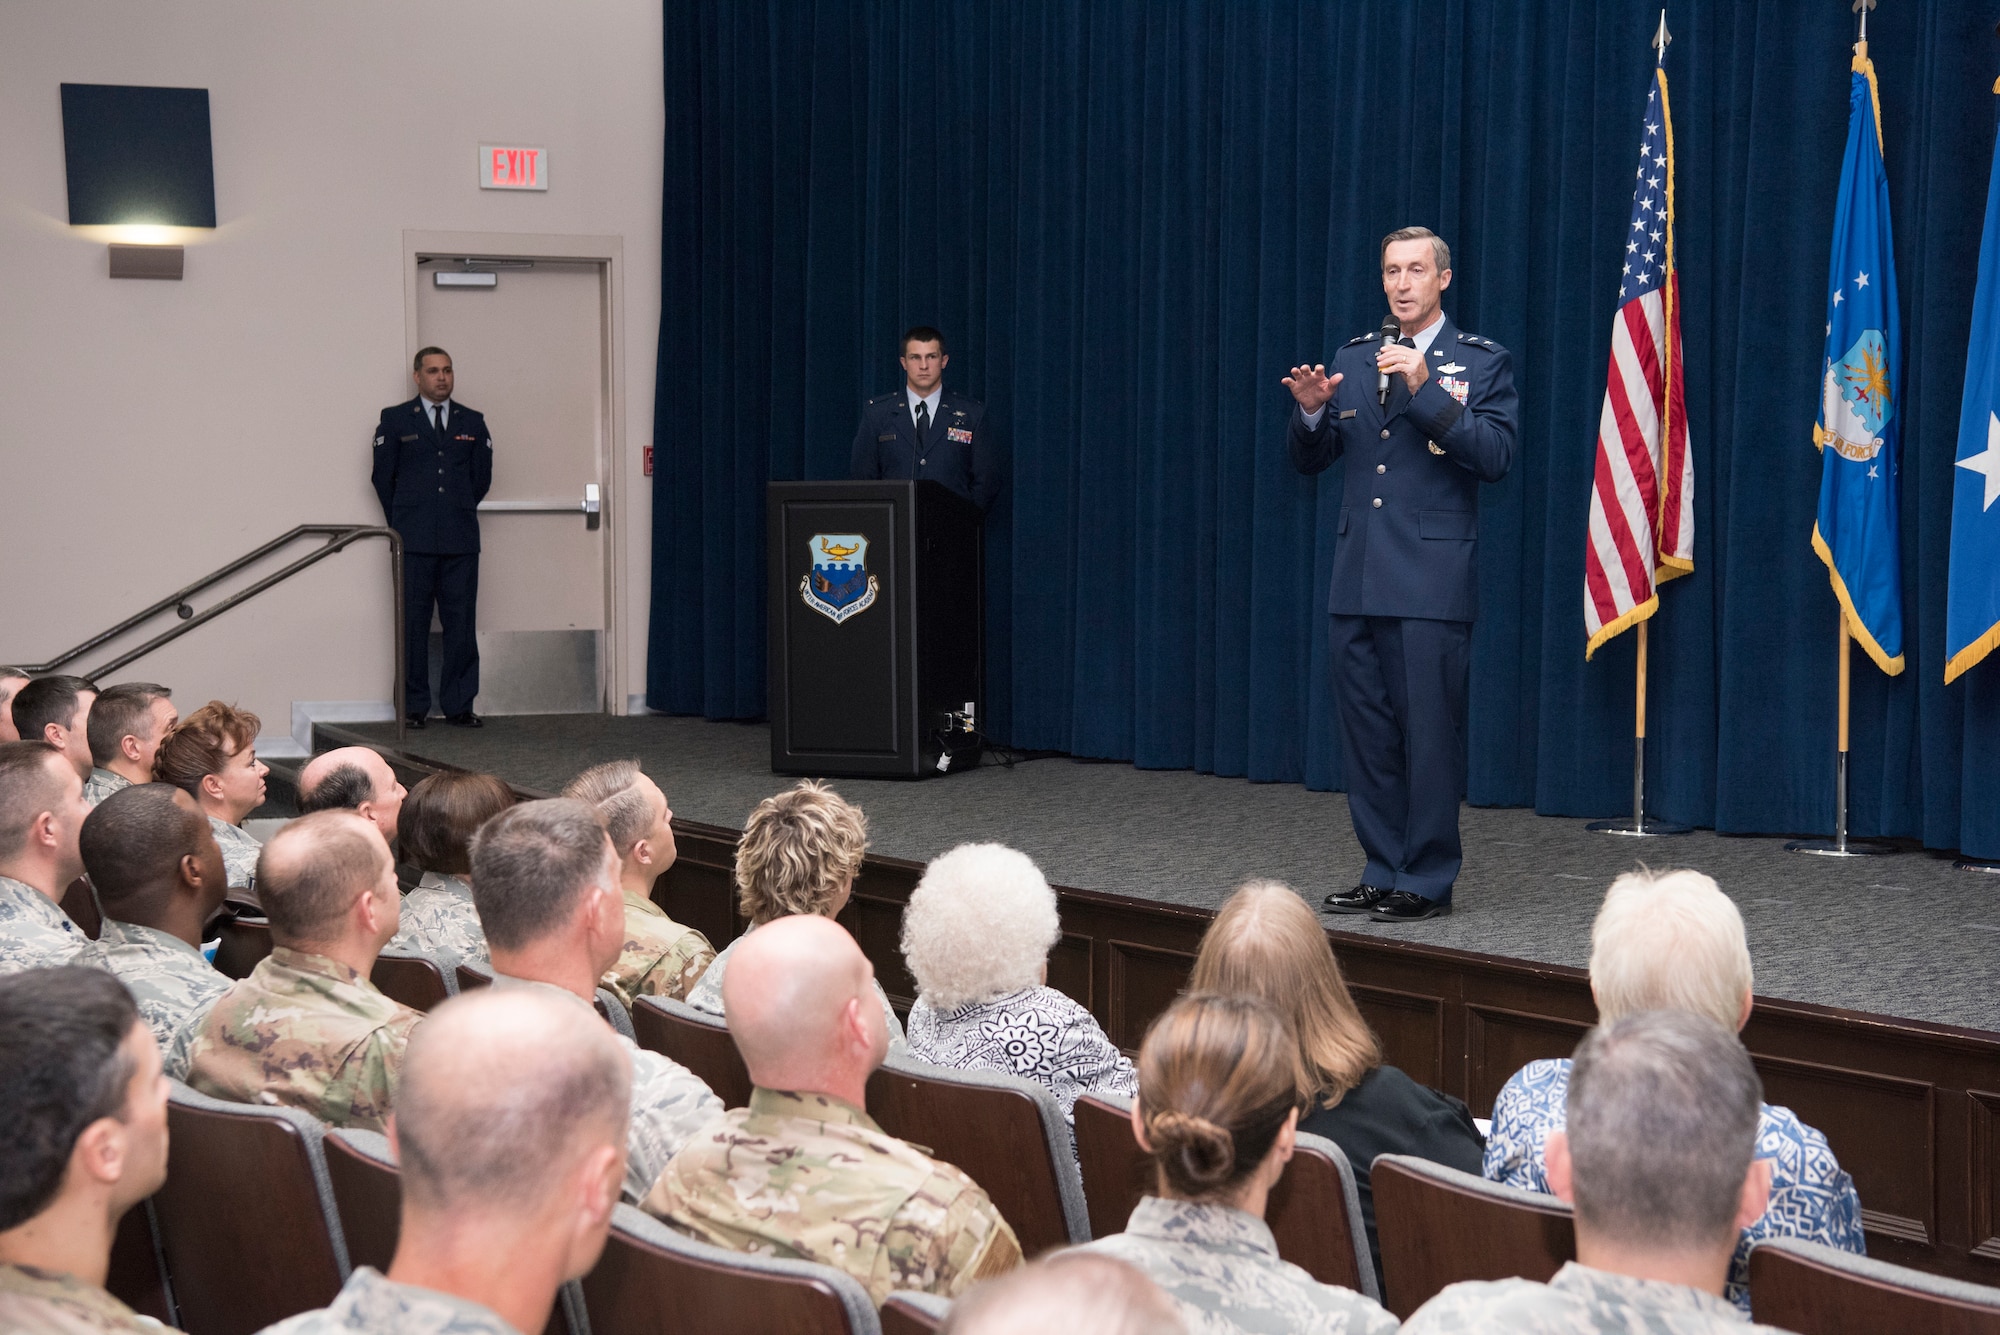 Maj. Gen. Ronald “Bruce” Miller, 10th Air Force commander, addresses the crowd during a ceremony over which he presided, activating the 960th Cyberspace Wing.